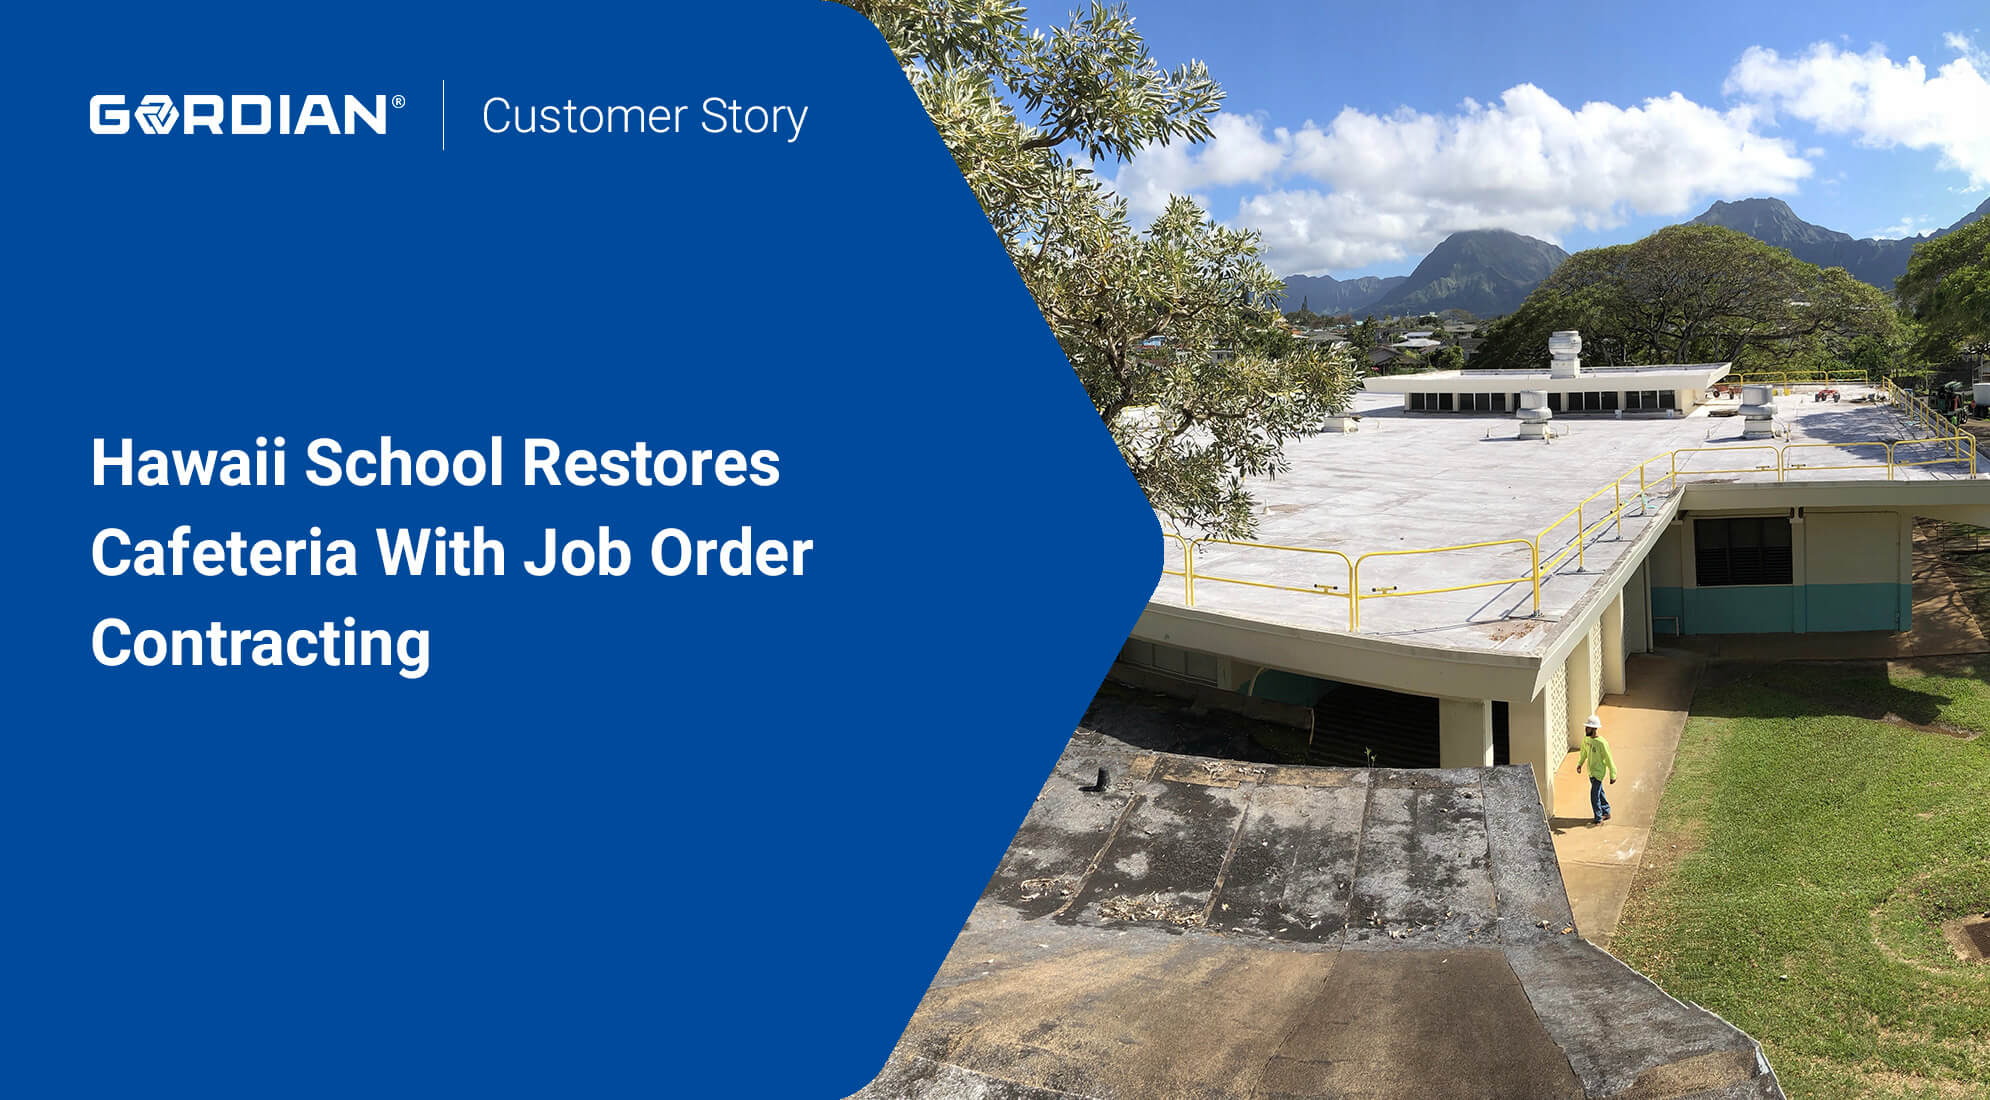 Hawaii School Leverages Job Order Contracting to Revamp Cafeteria Quickly 3